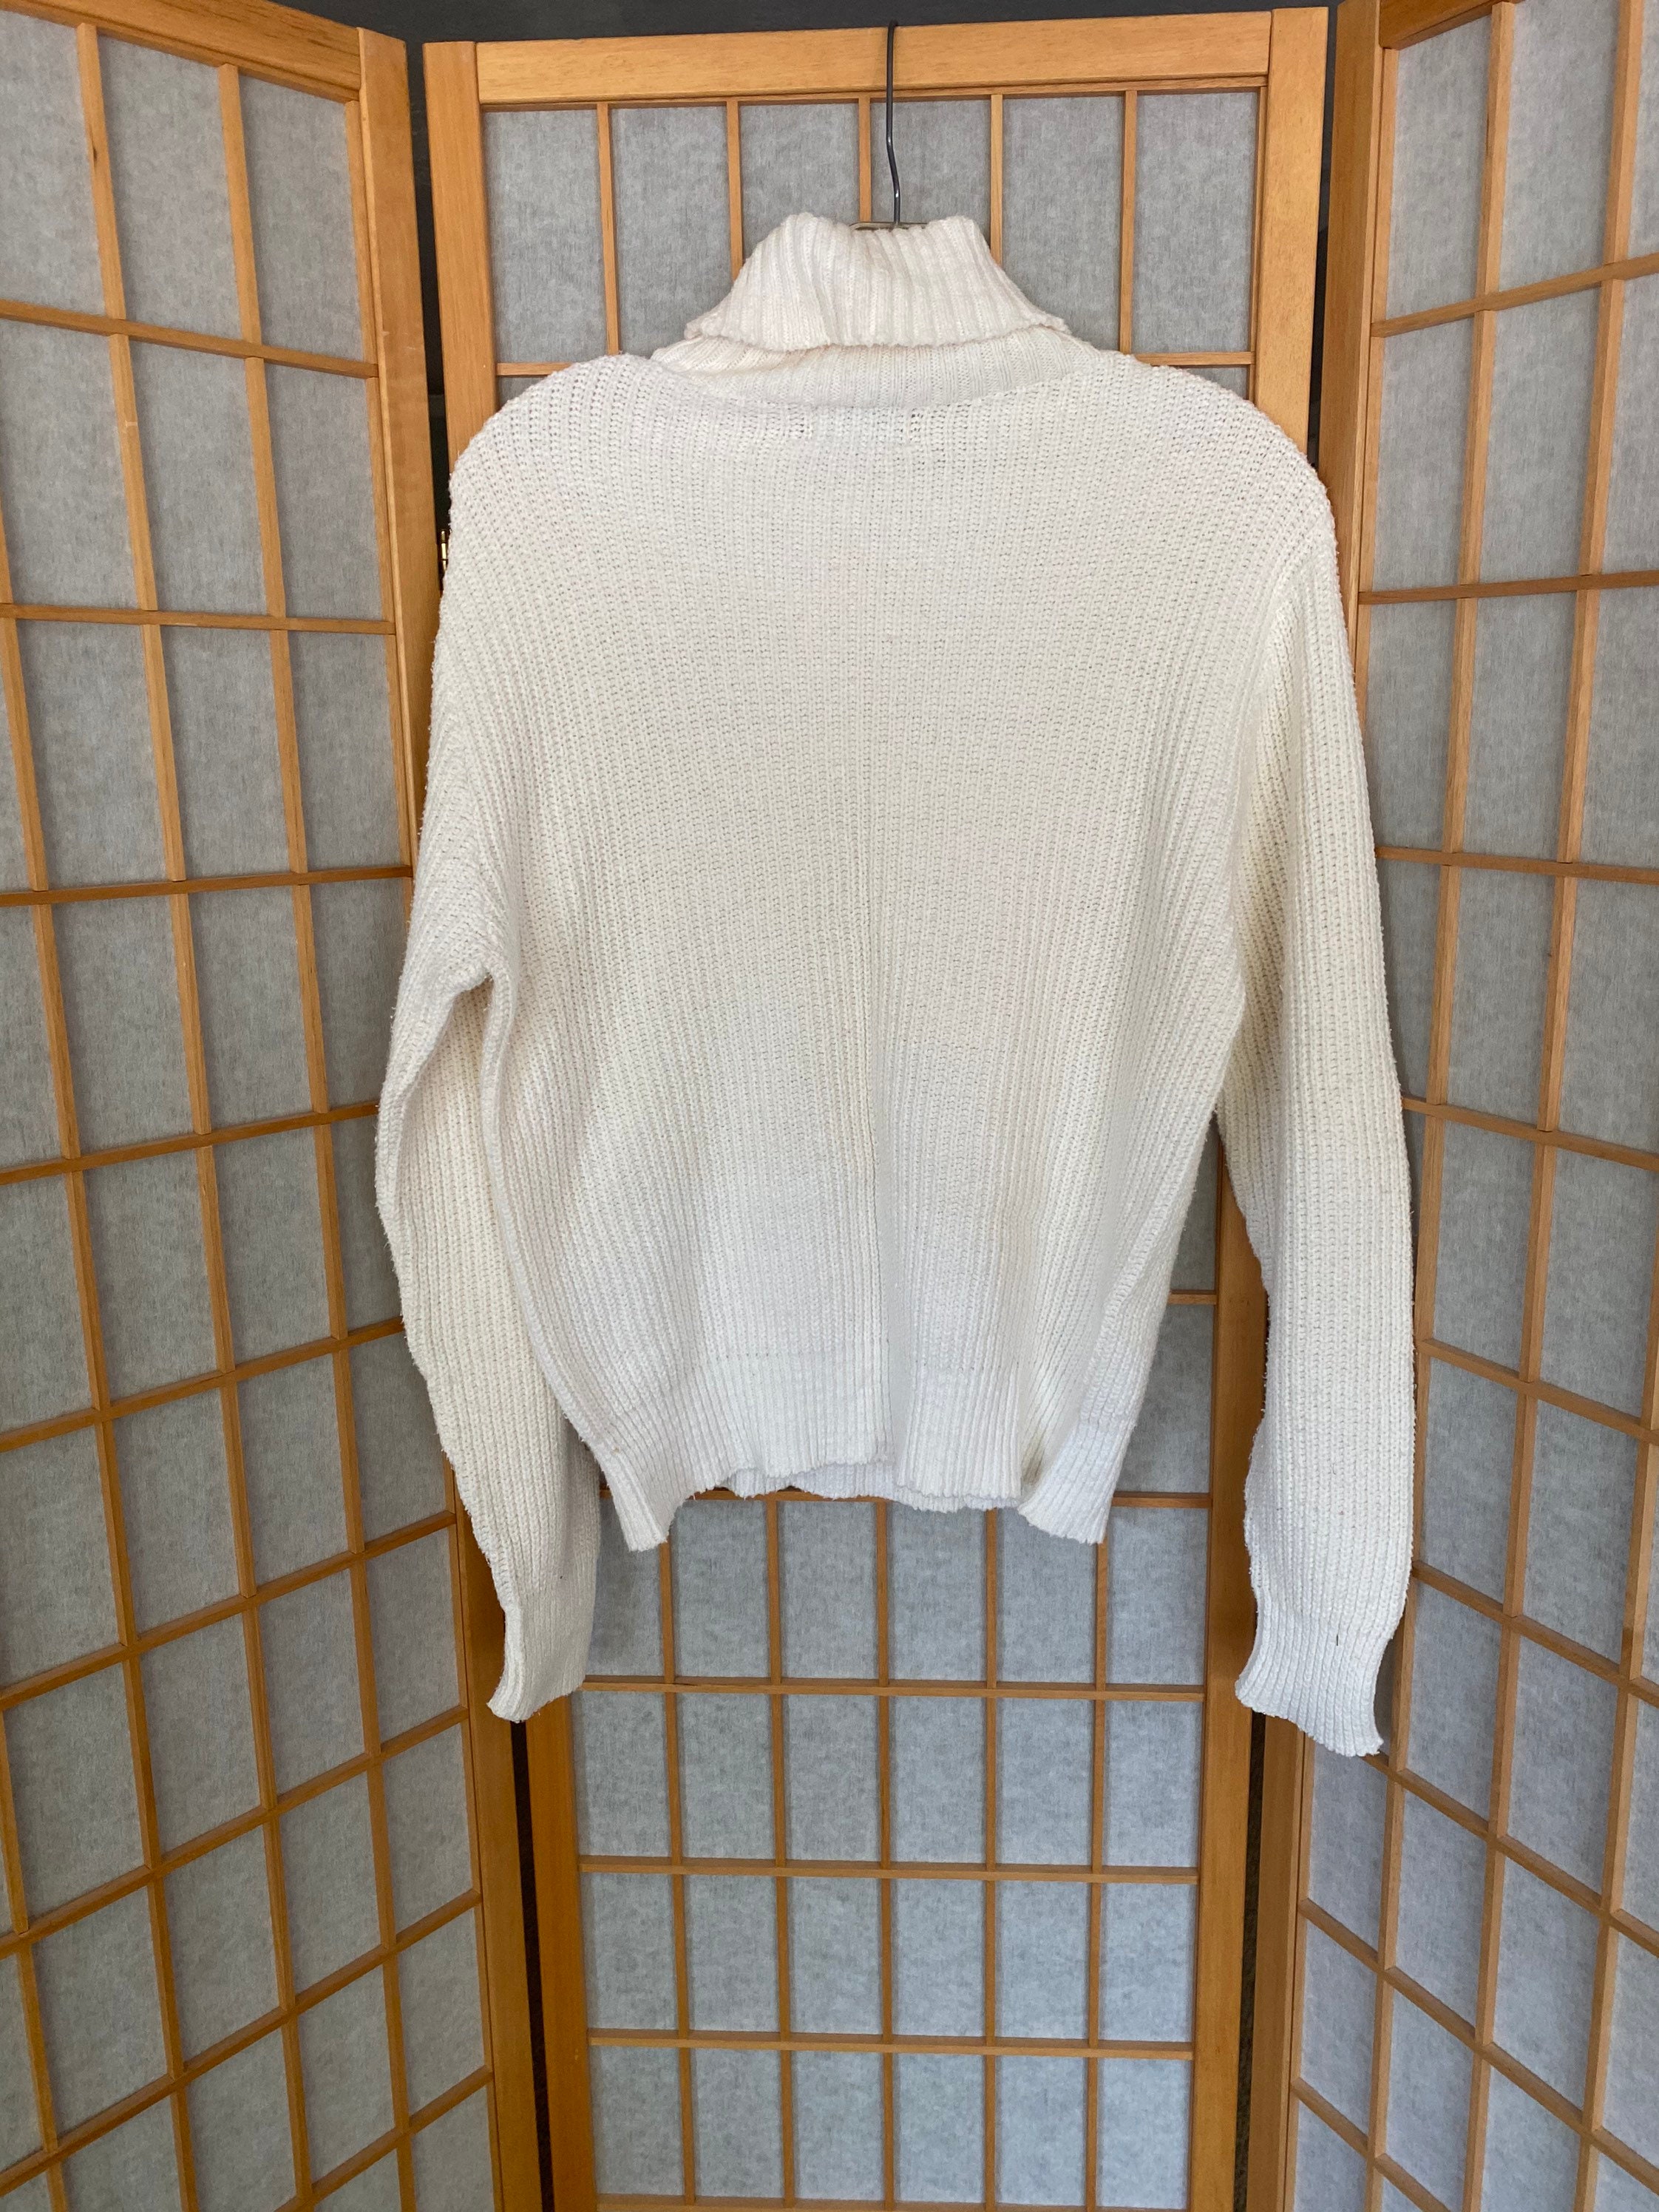 Vintage 1960s white turtleneck sweater by Regent Row Fashions | Etsy